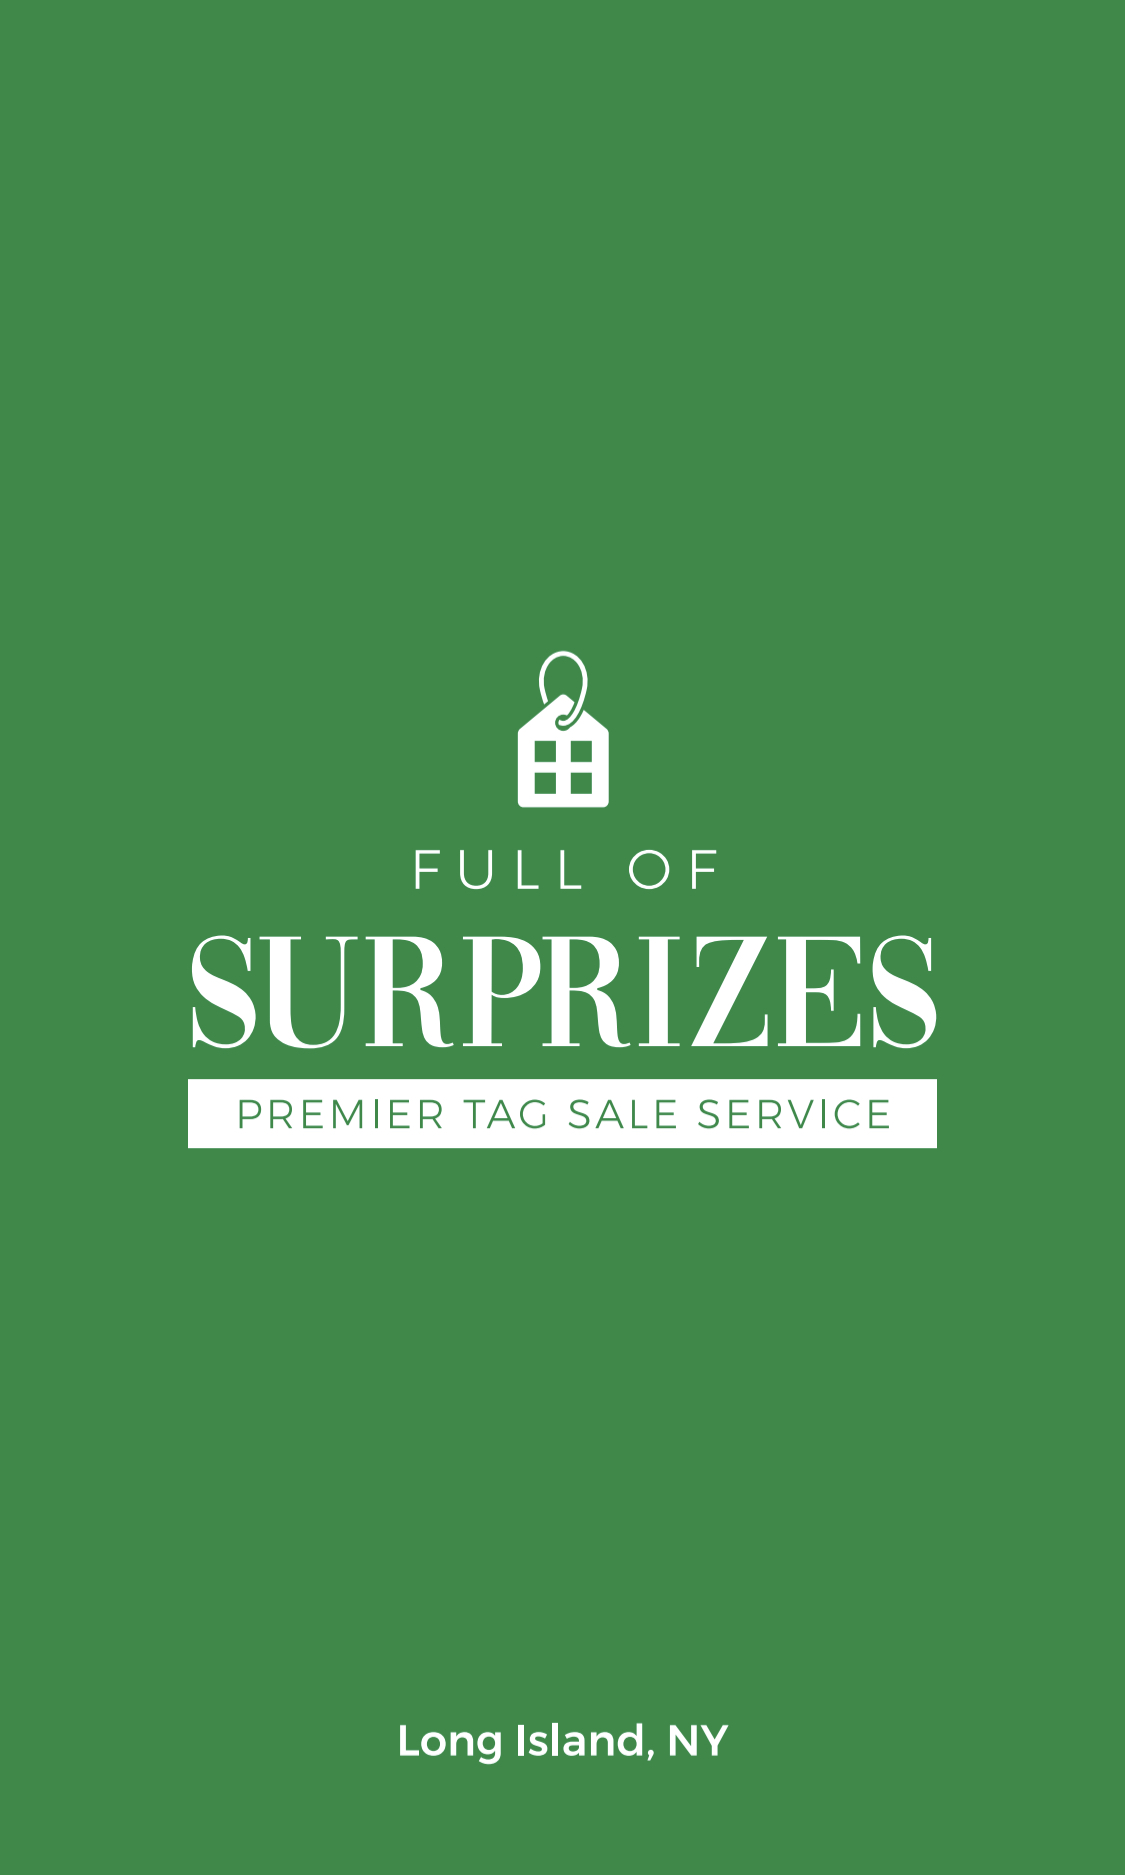 Full of Surprizes Estate and Tag Sales Auctions | AuctionNinja